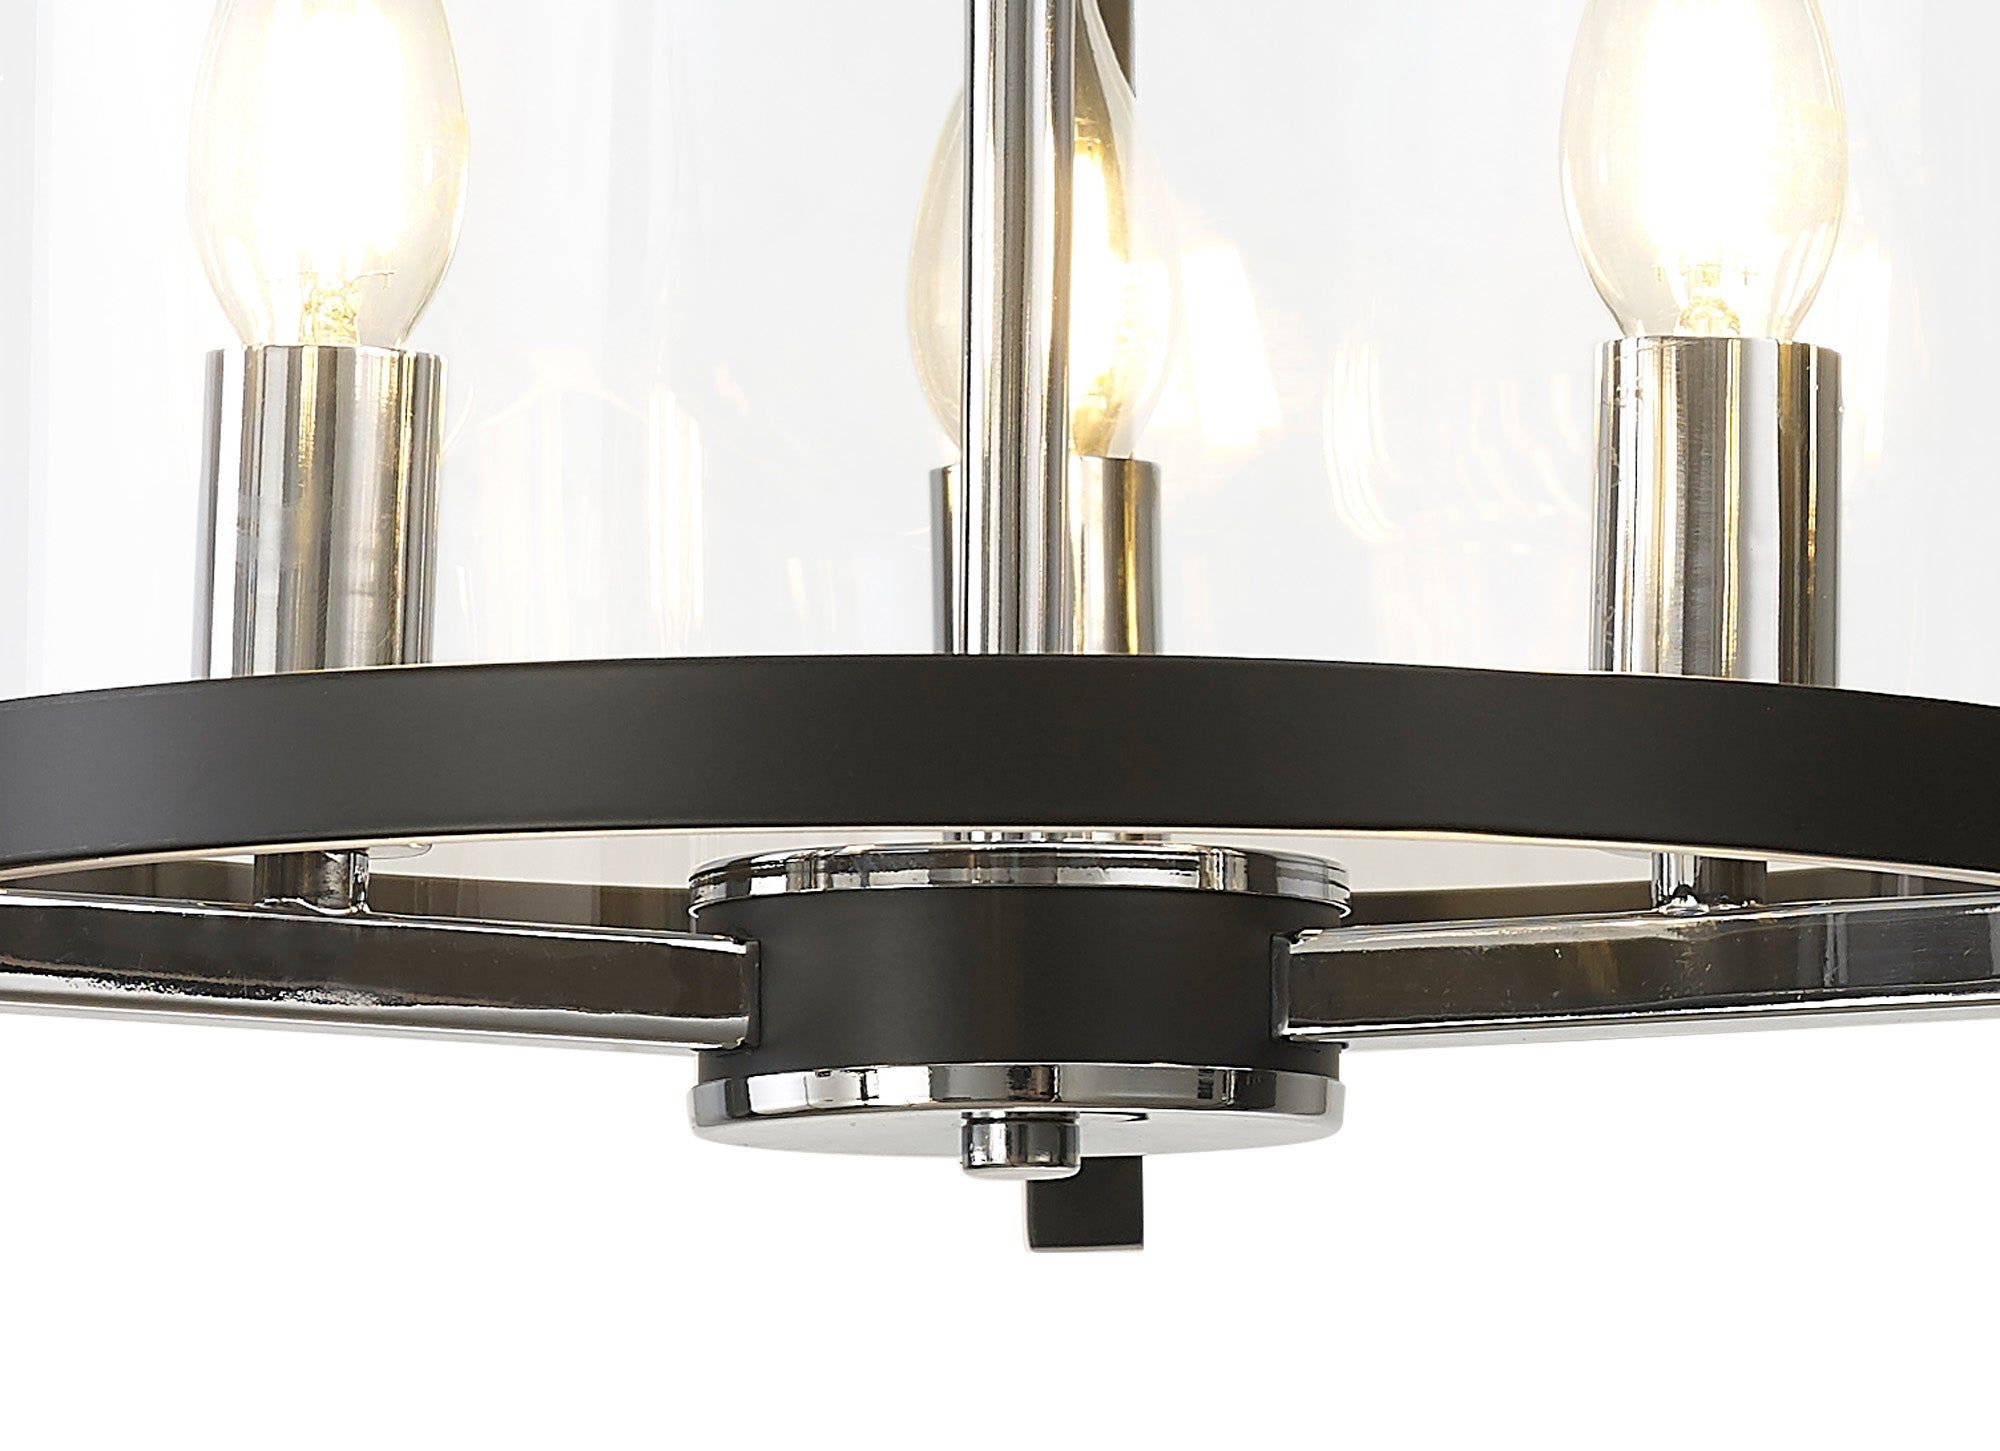 Nolan Single Small Pendant 3 Light E14 Black With Polished Chrome Detail And Clear Glass